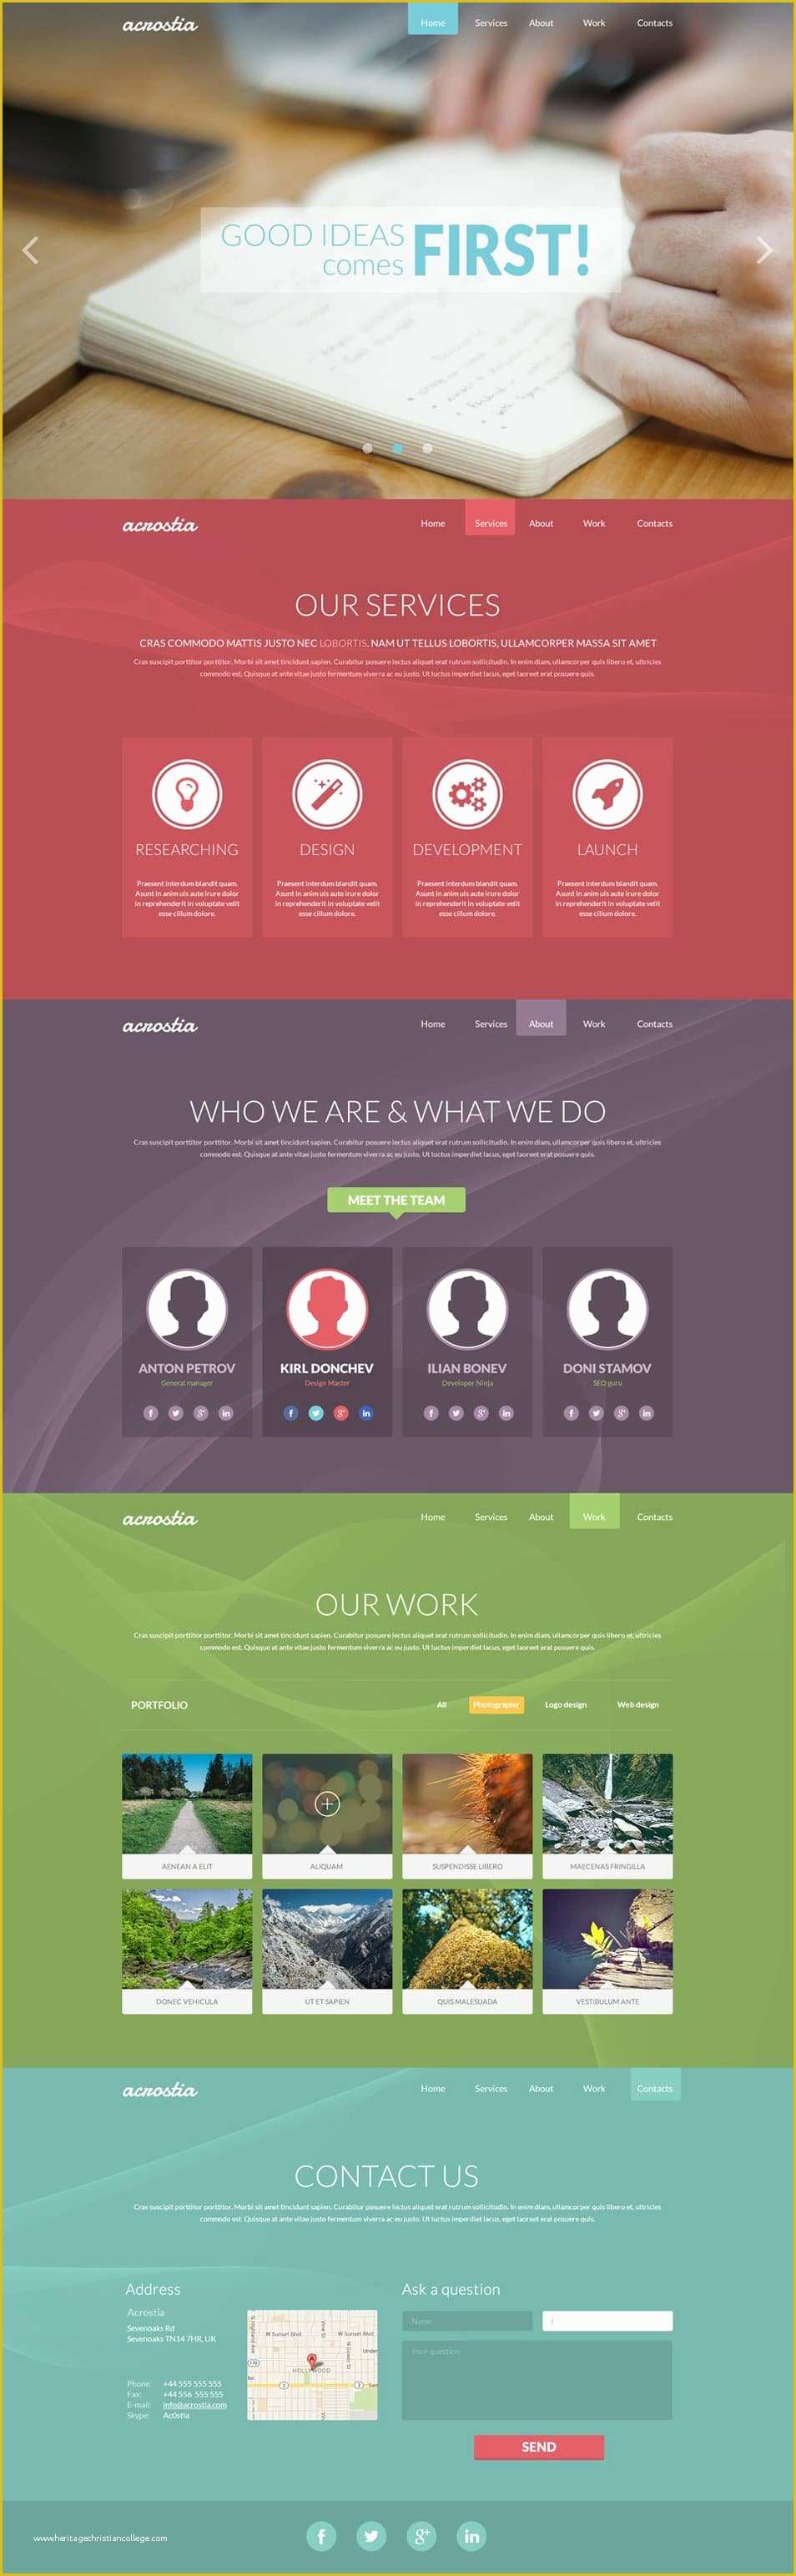 One Page Template Free Of Free Single Page Website Templates Psd Css Author